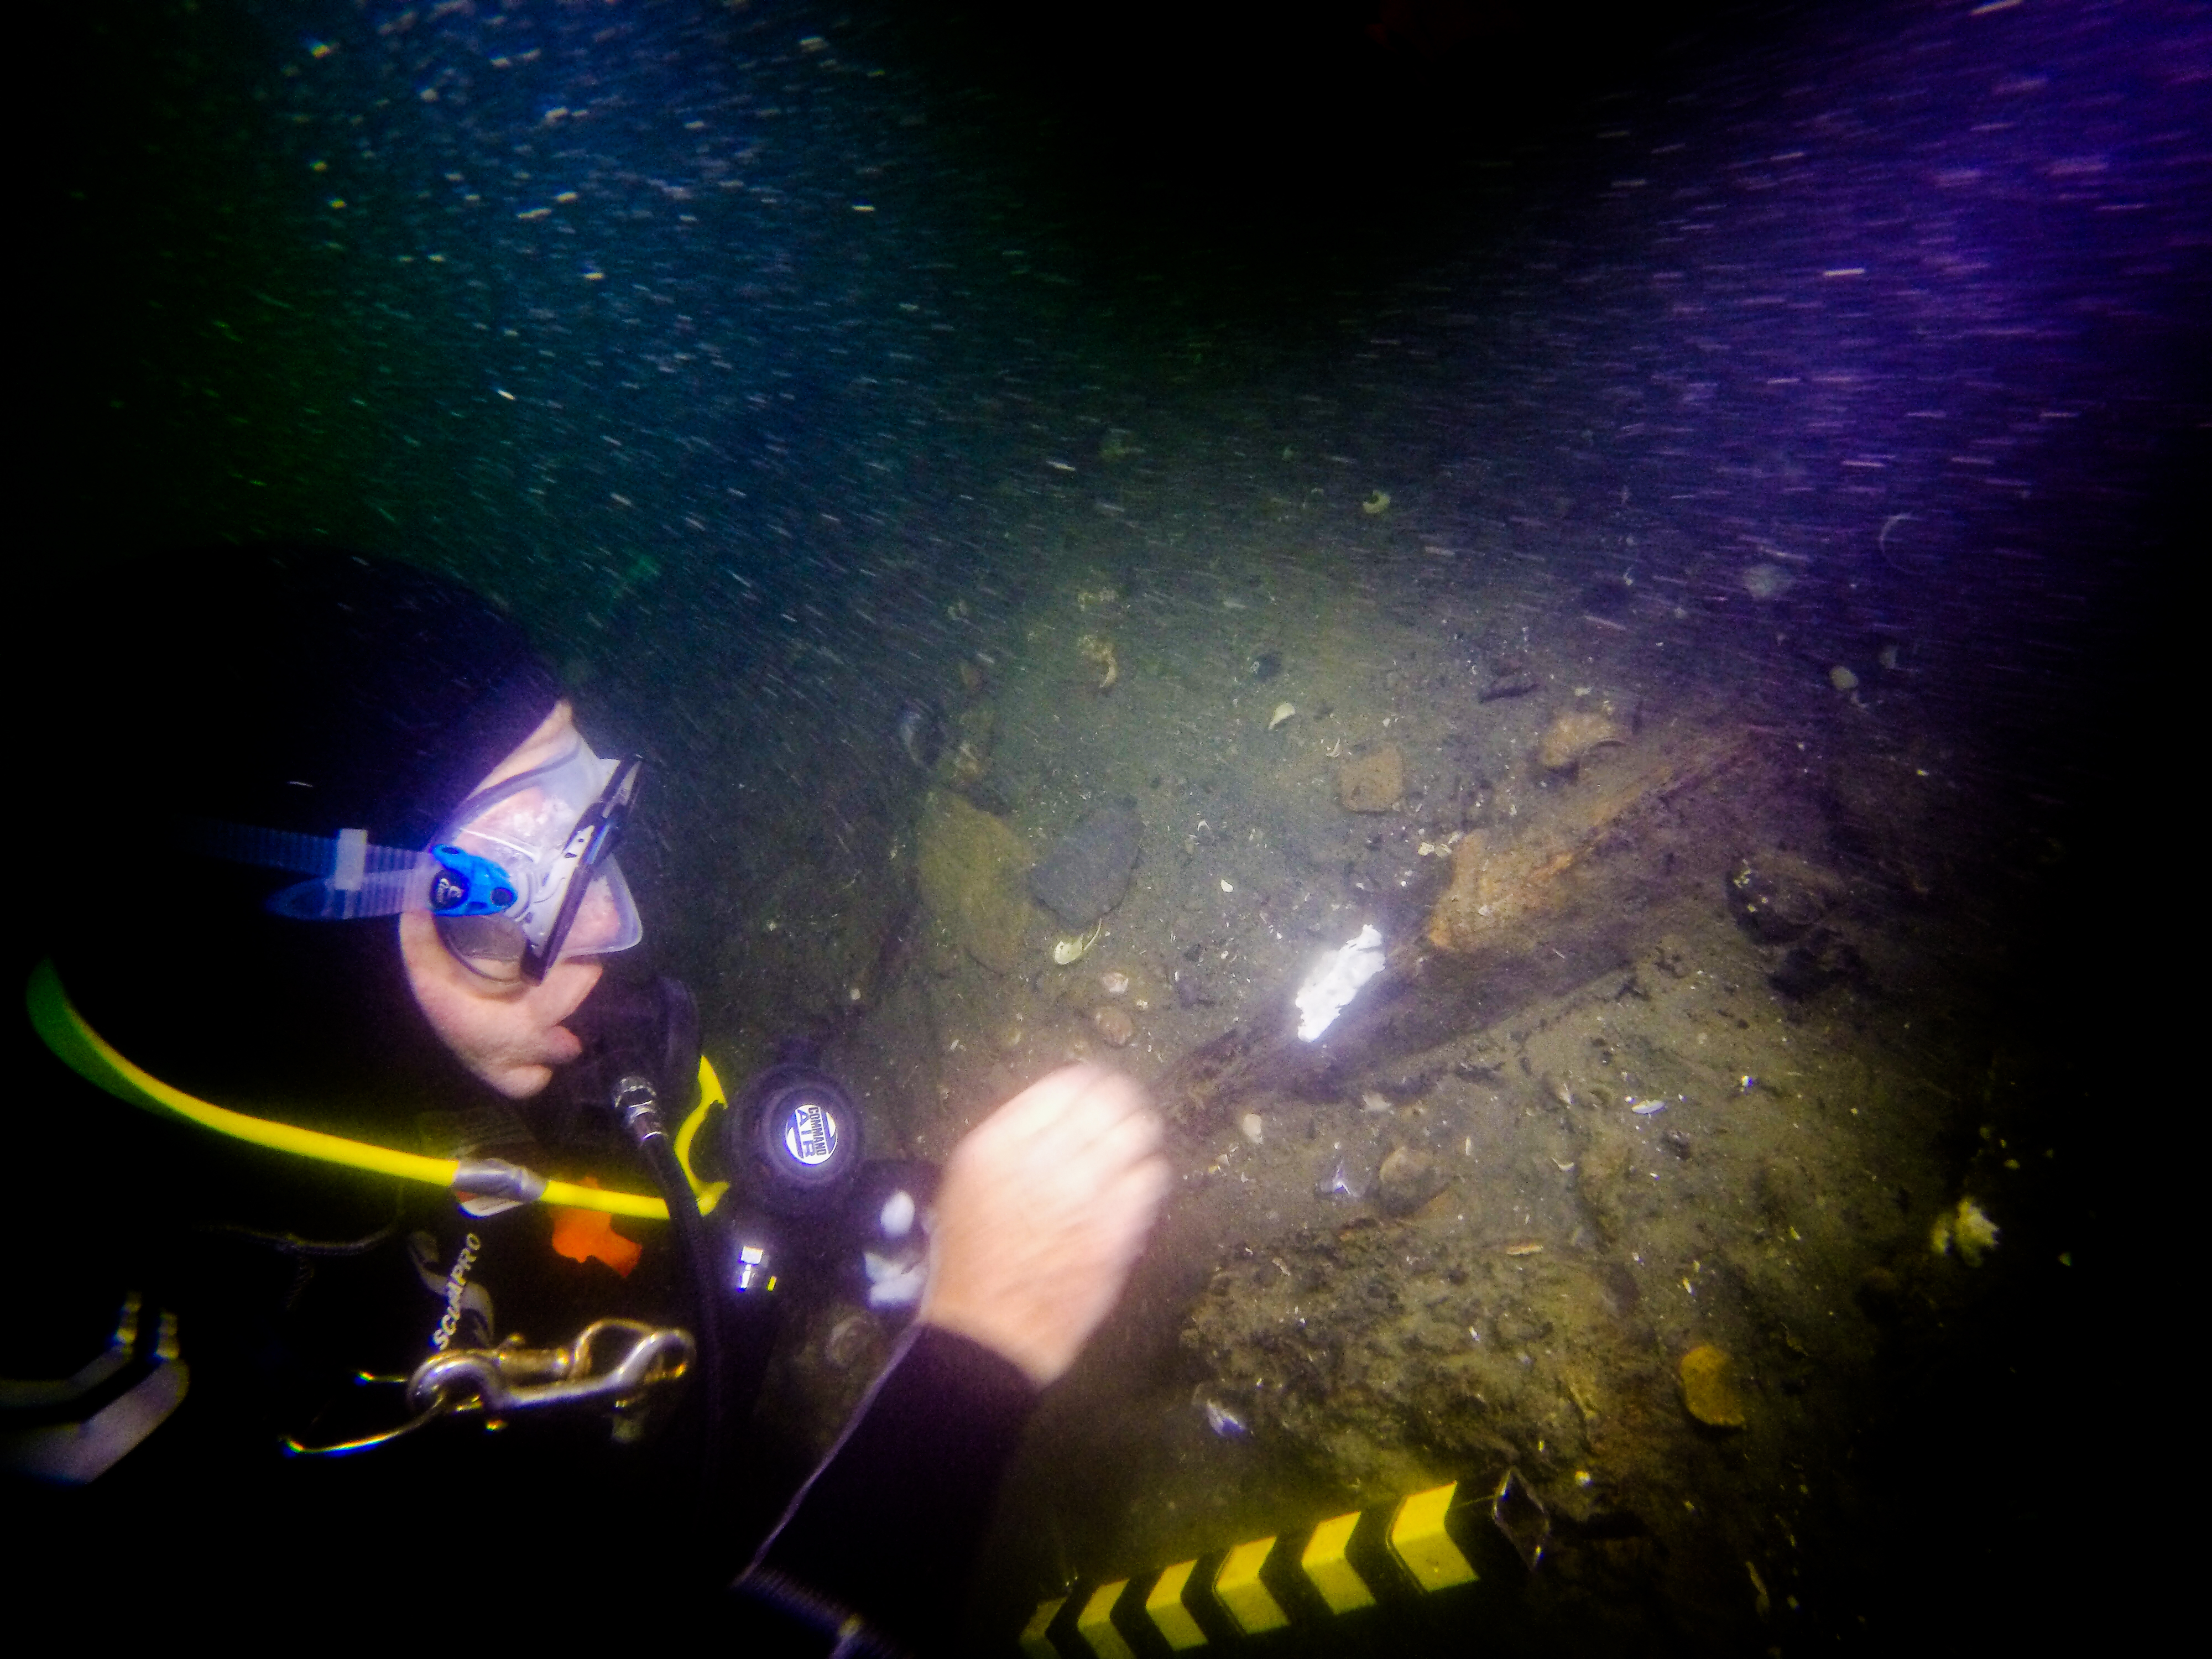 A diver working on the seafloor with a light, examining part of a wreck 